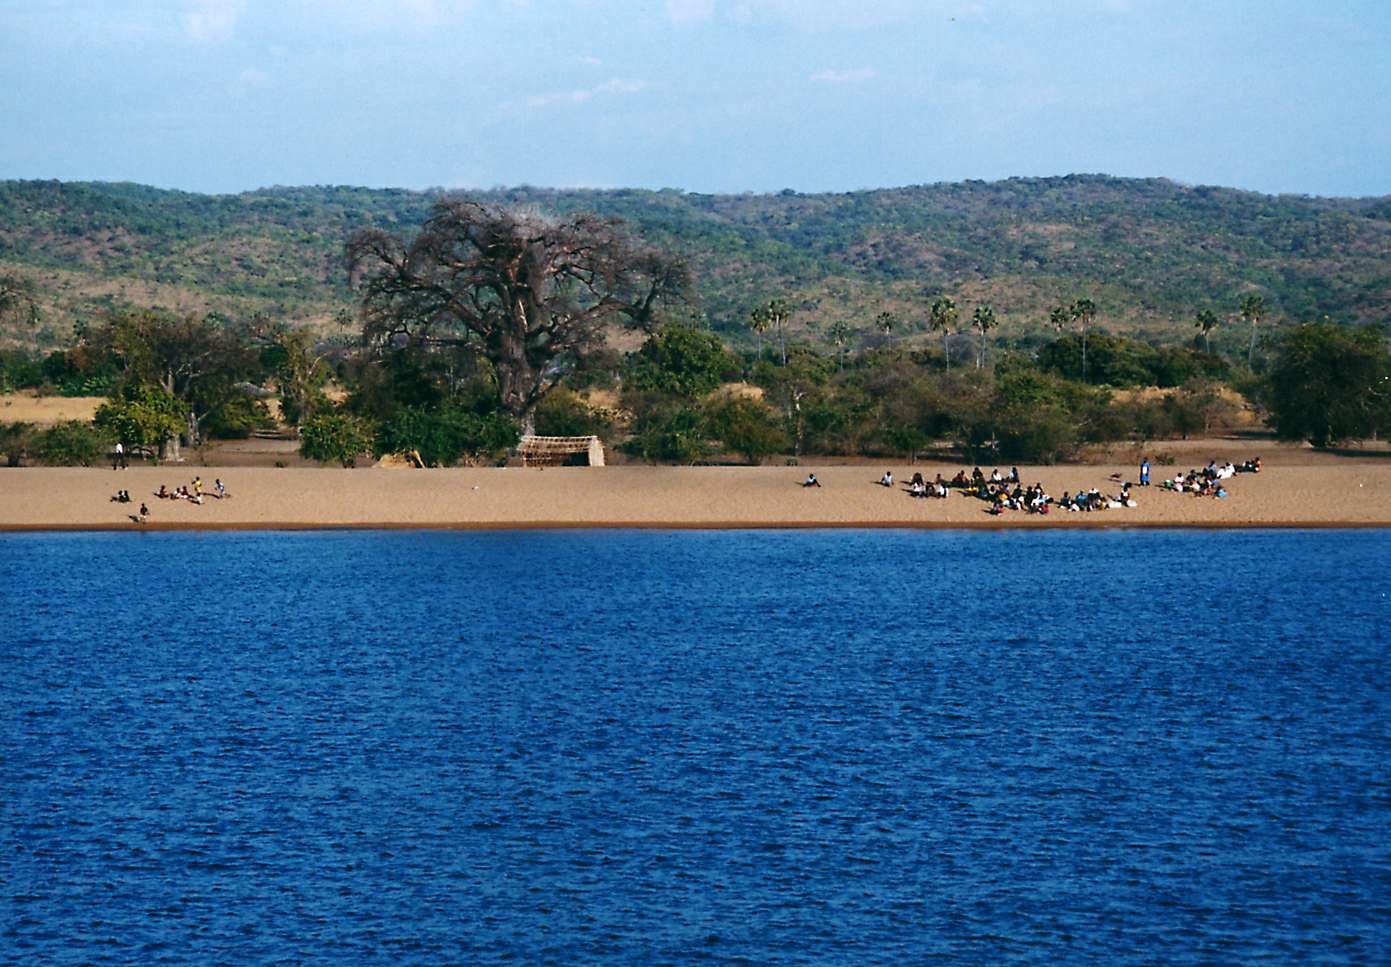 Coast of Lake Malawi on the Mozambican side. Source: Wikimedia Commons